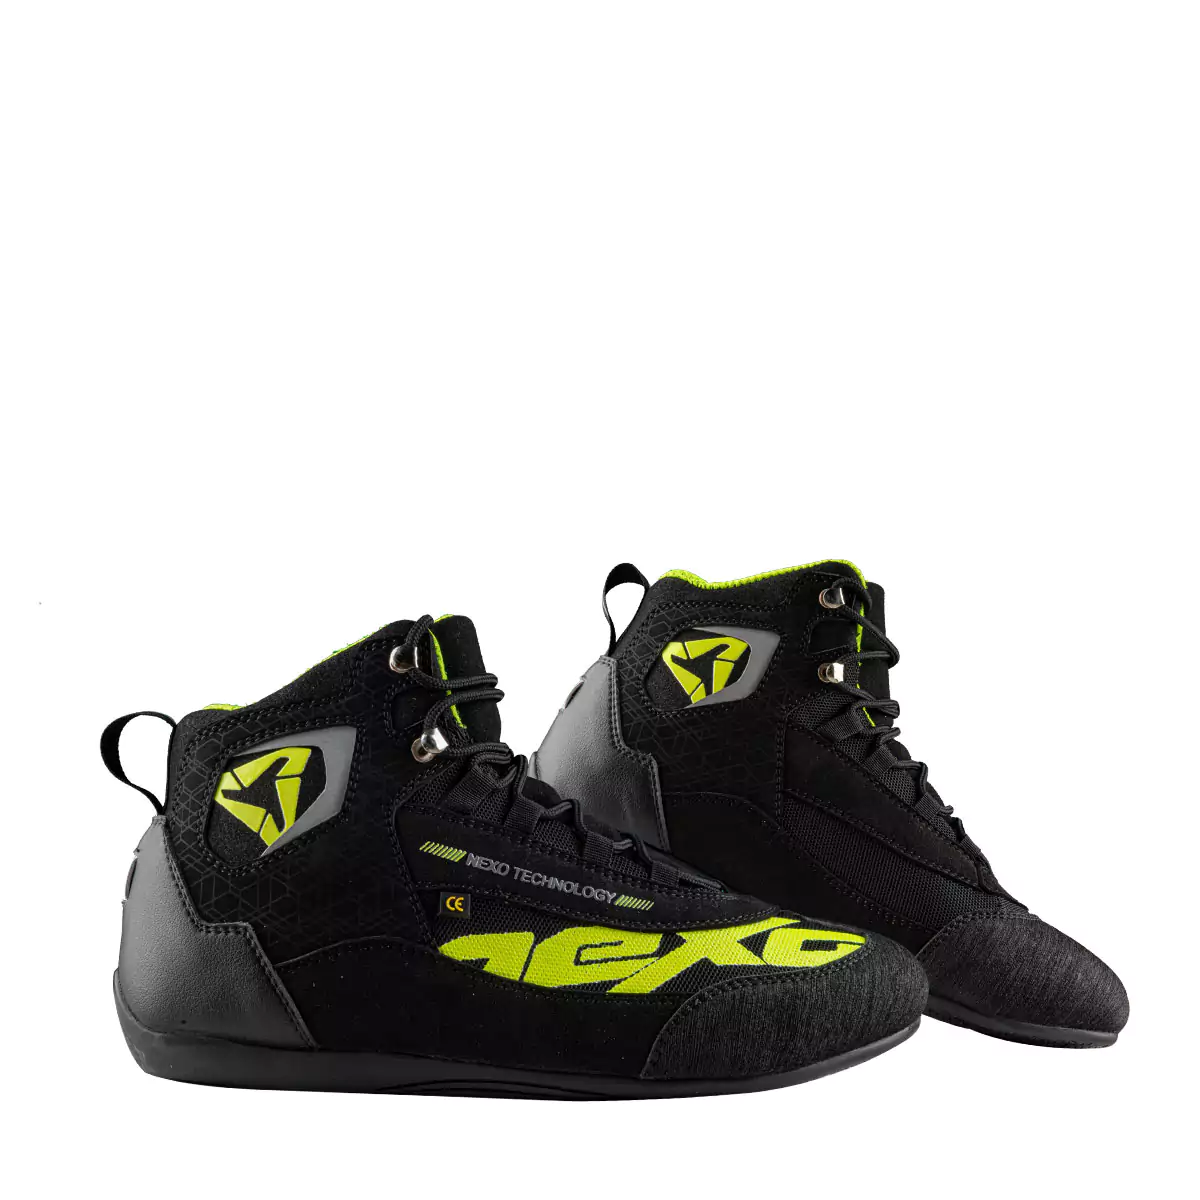 a pair of black and neon colored car racing boots